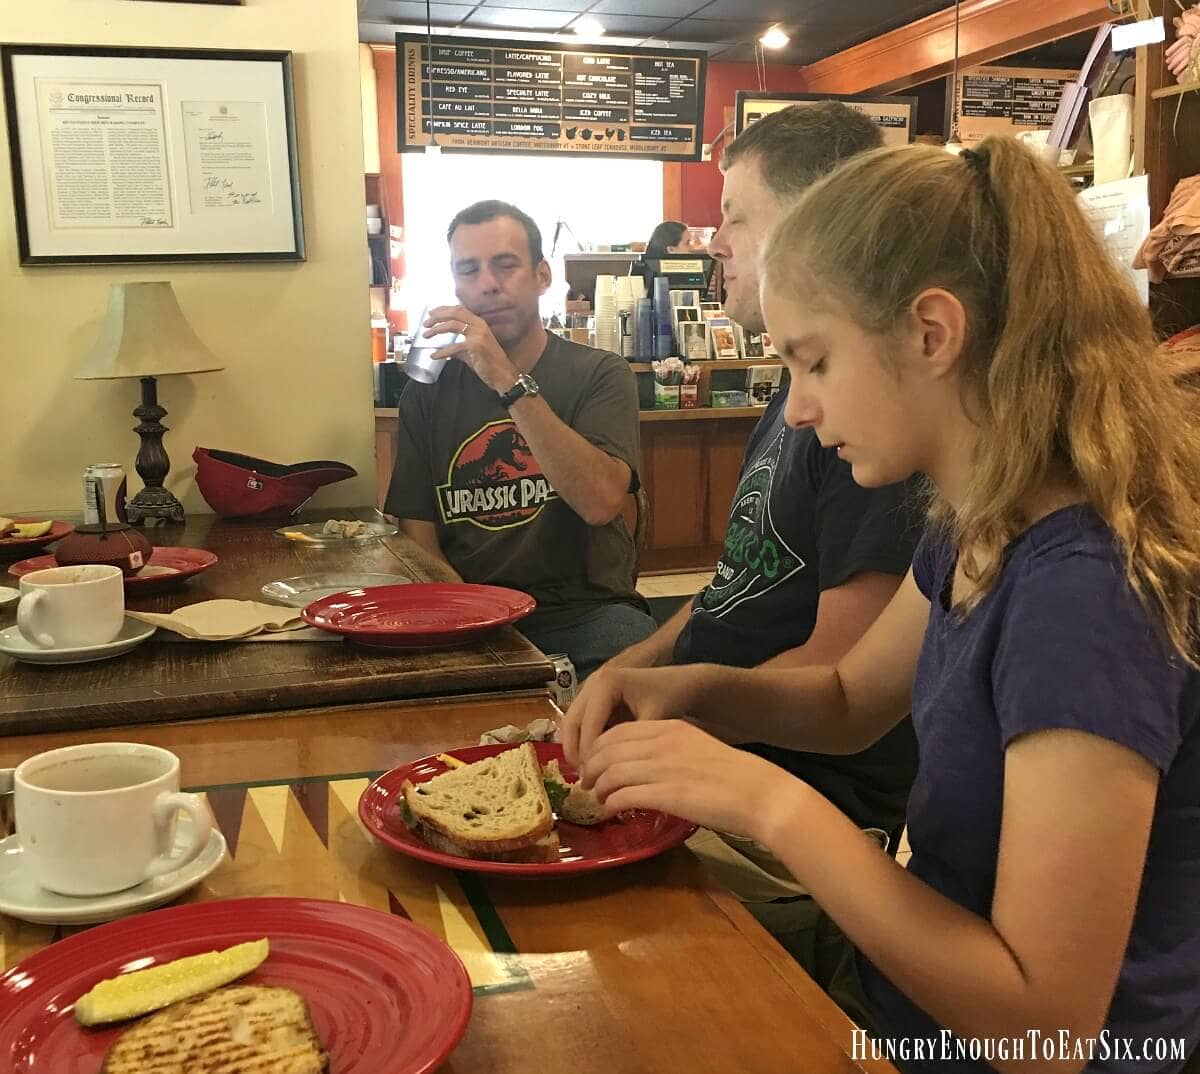 Two adults and a teen girl sitting at cafe tables eating sandwiches and having drinks.